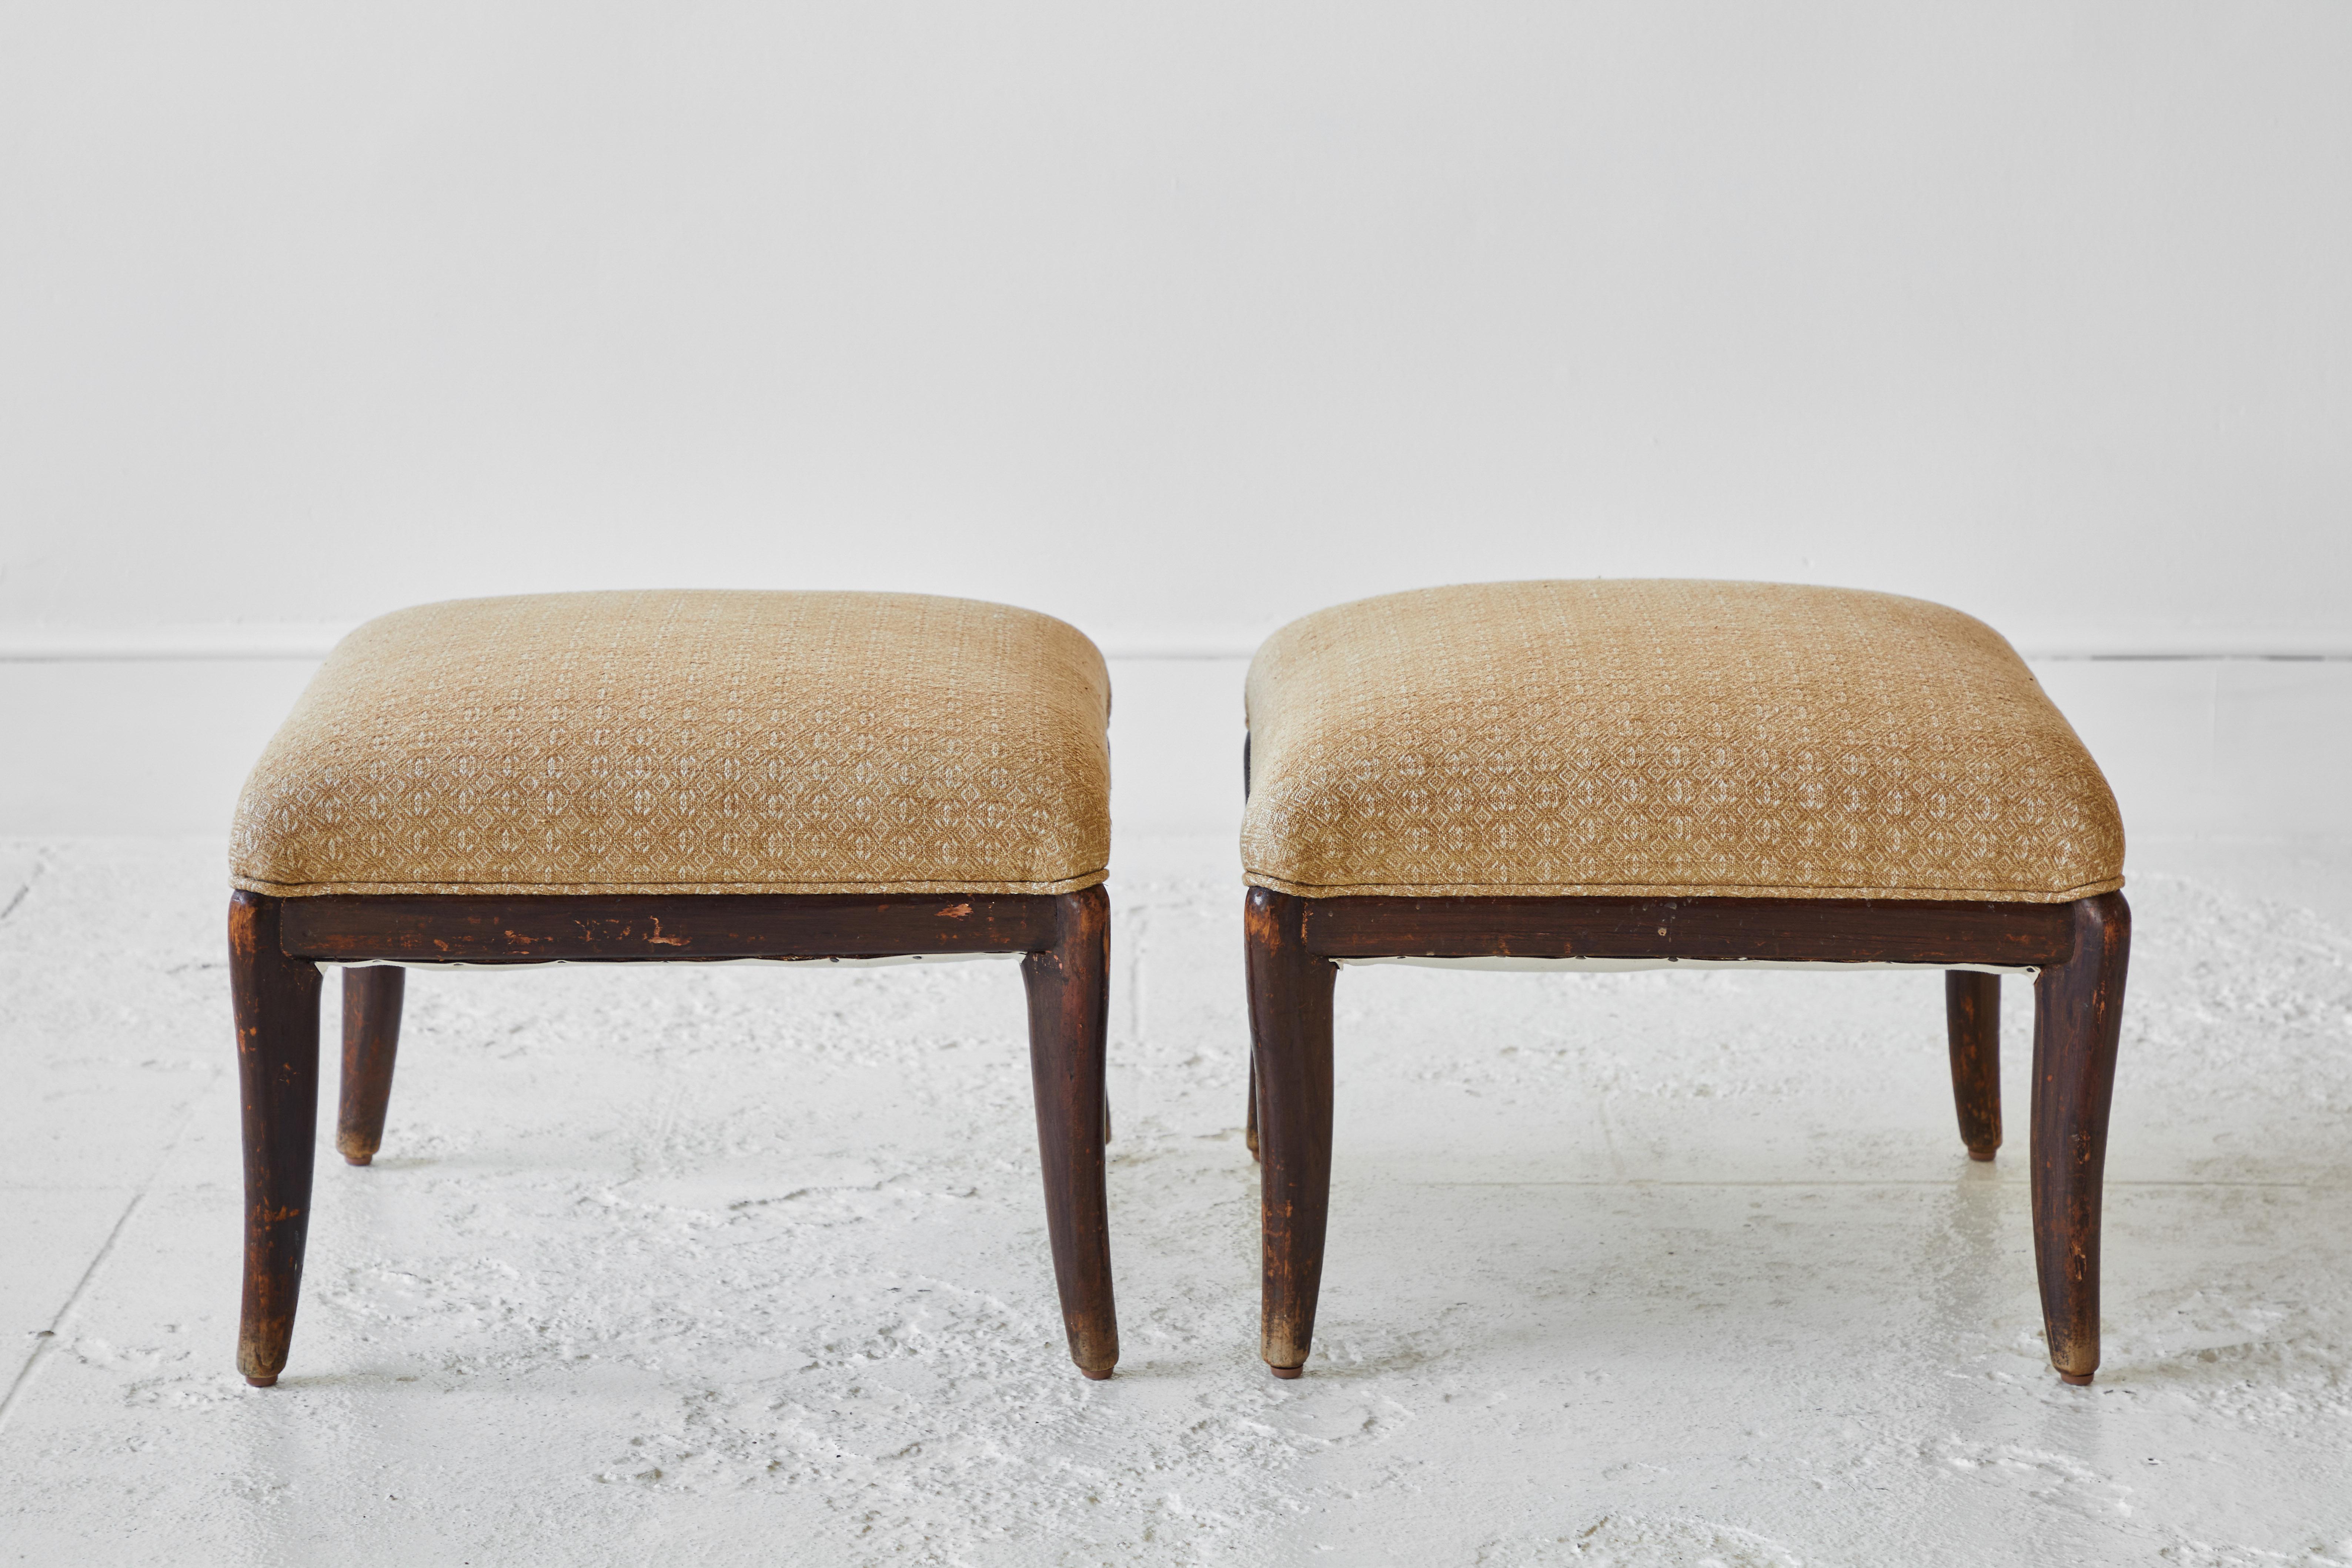 Pair of French wood framed stools newly upholstered in the woven honey colored fabric.